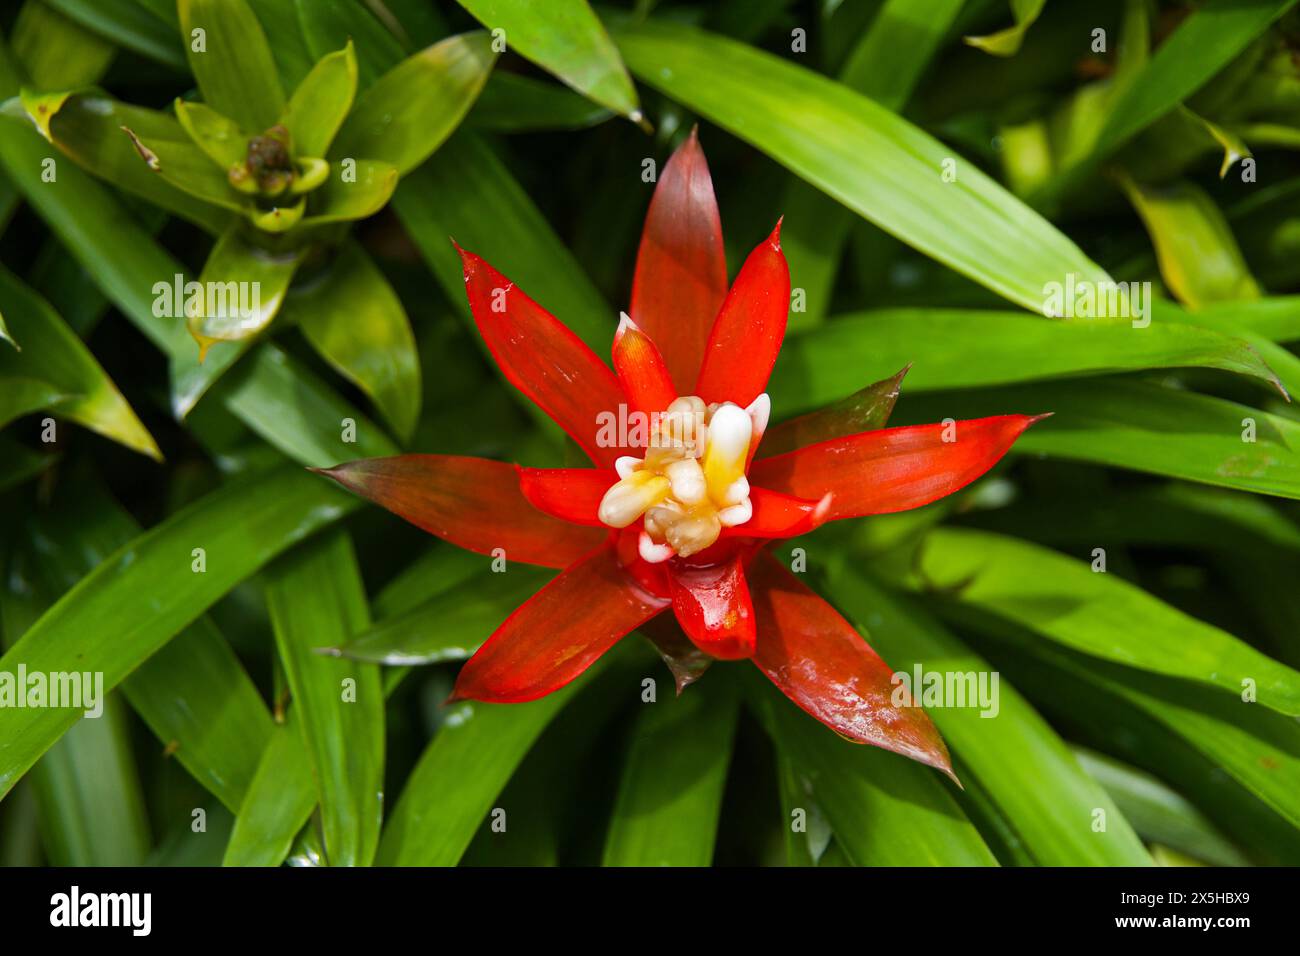 Stunning red flower against the backdrop of green foliage and other immature flowers Stock Photo